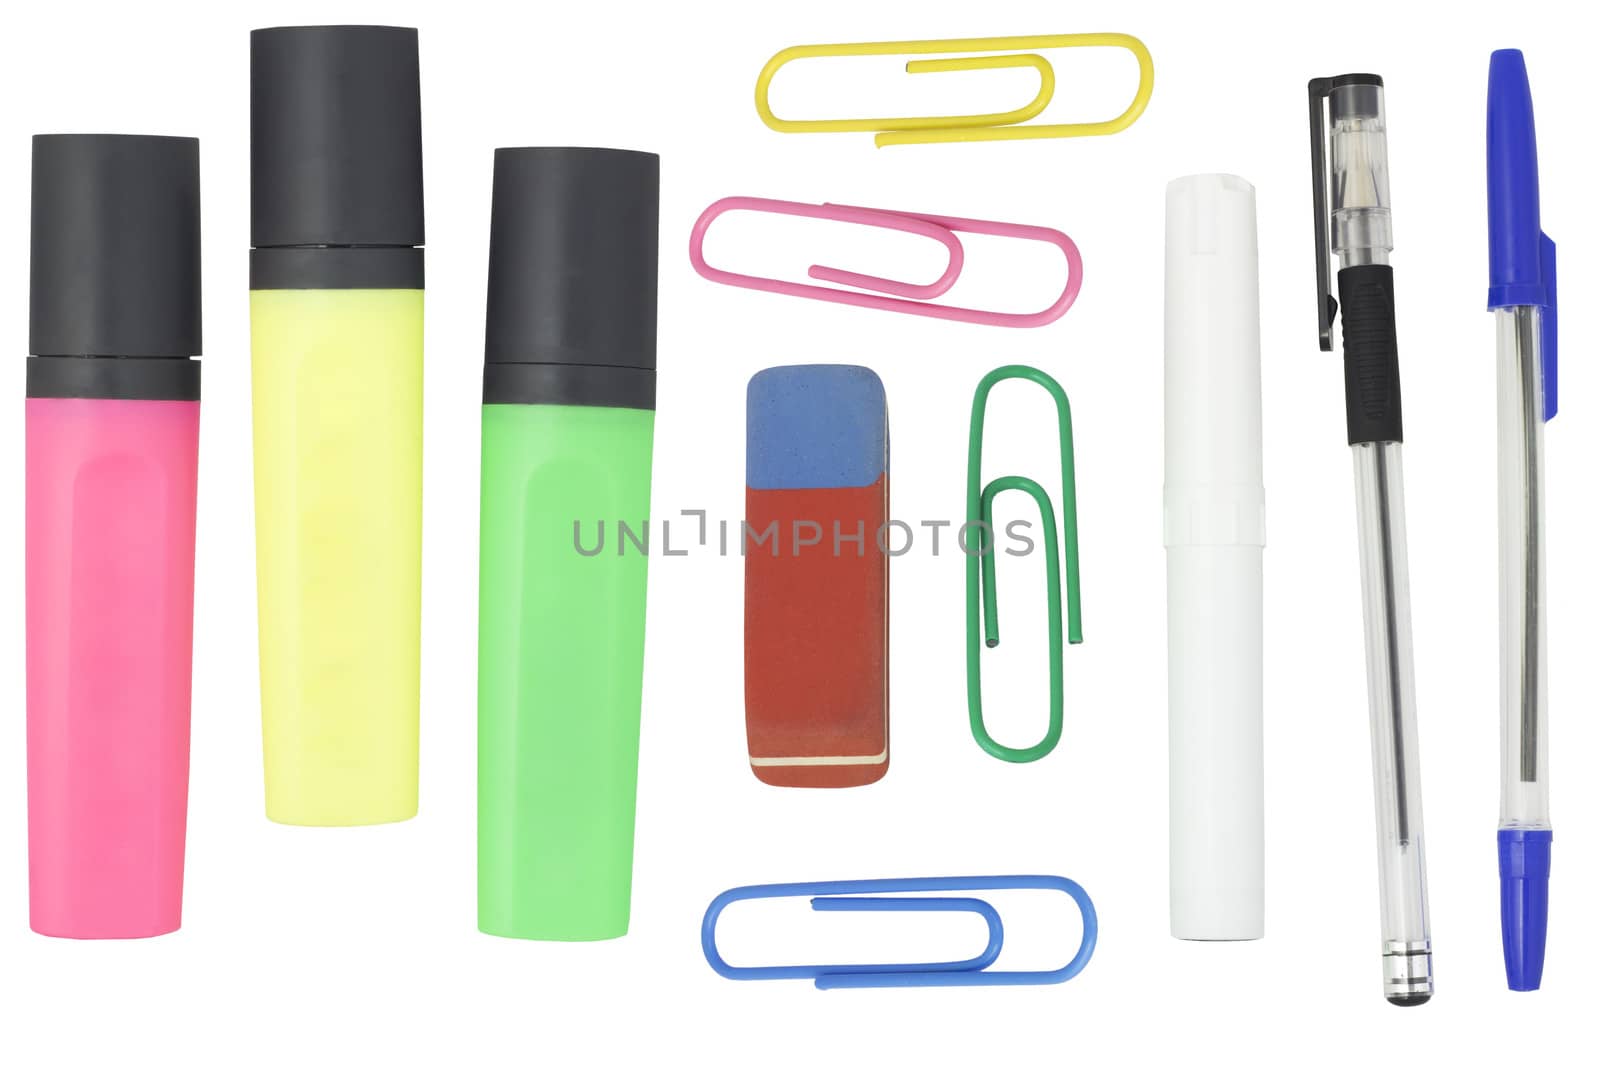 Office supplies: pens, markers, eraser and paper clips. Isolated on white background